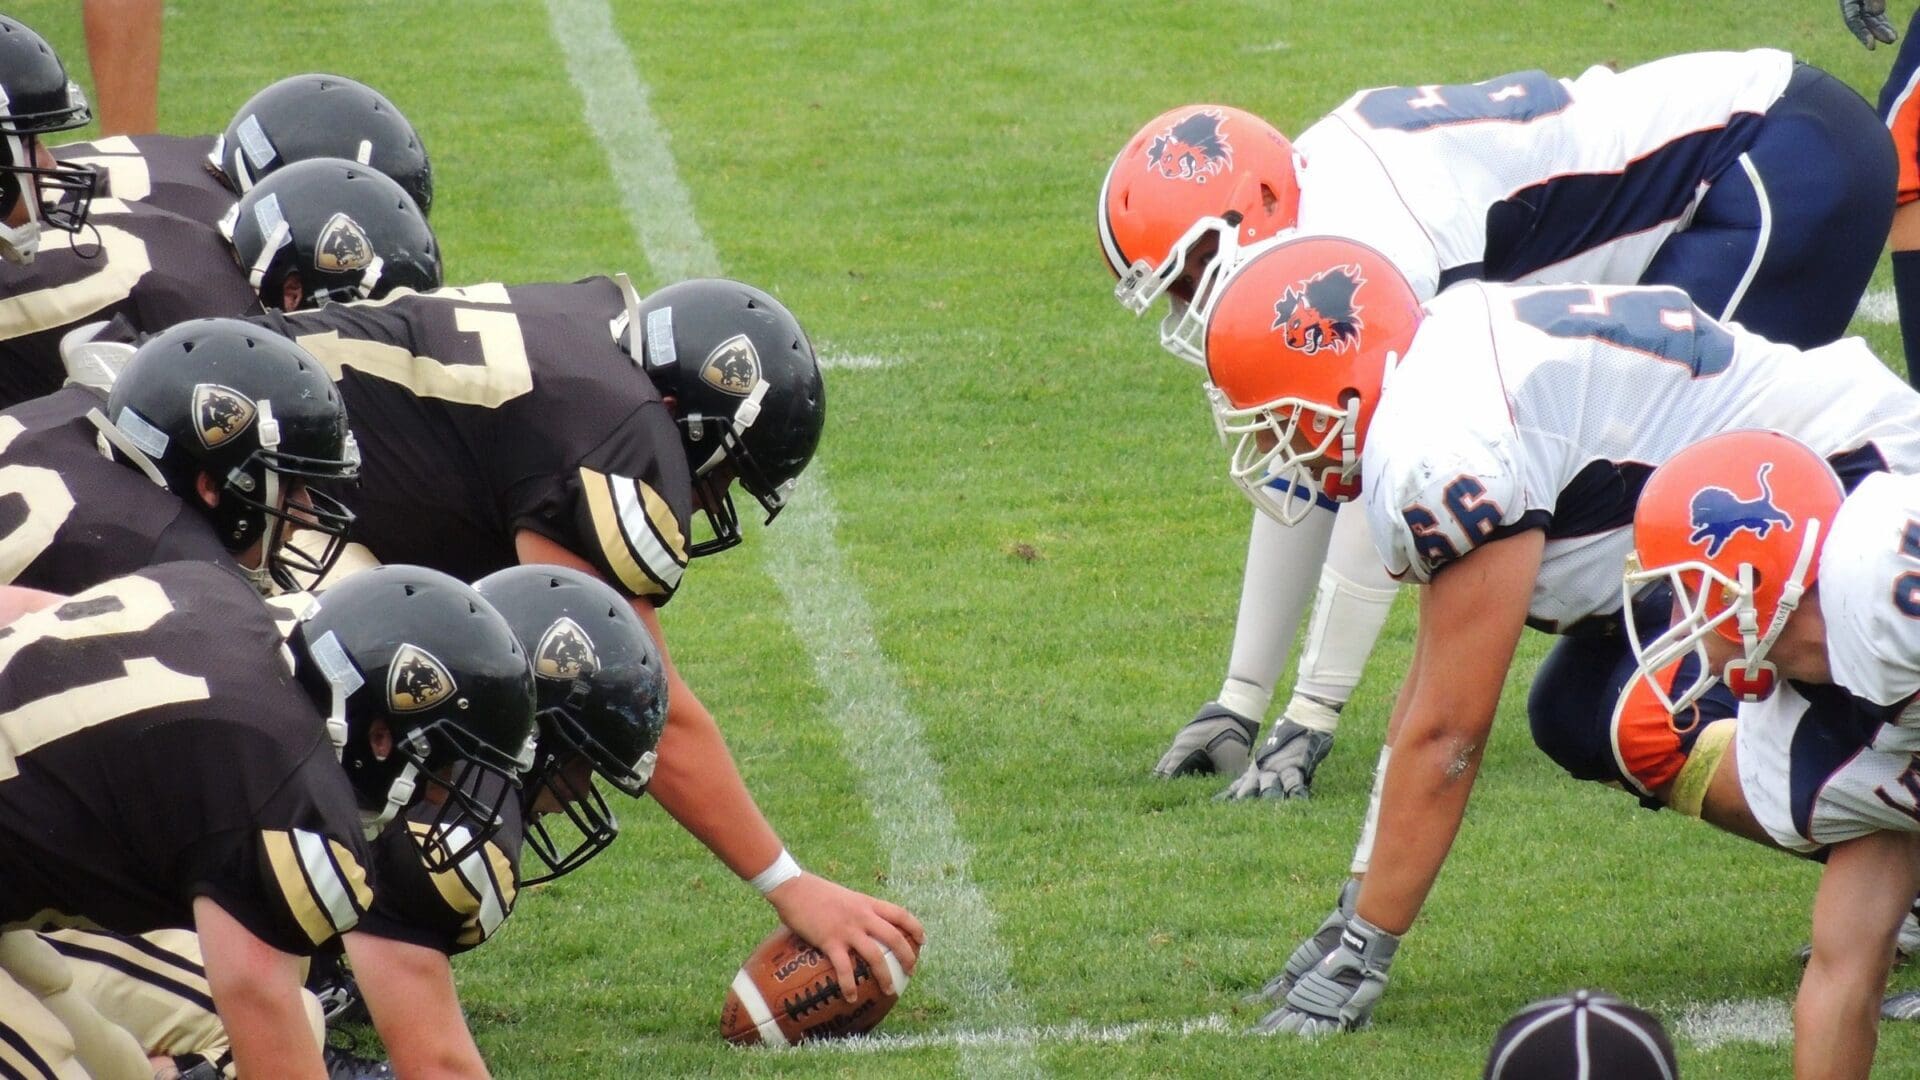 A group of football players lined up for a game.